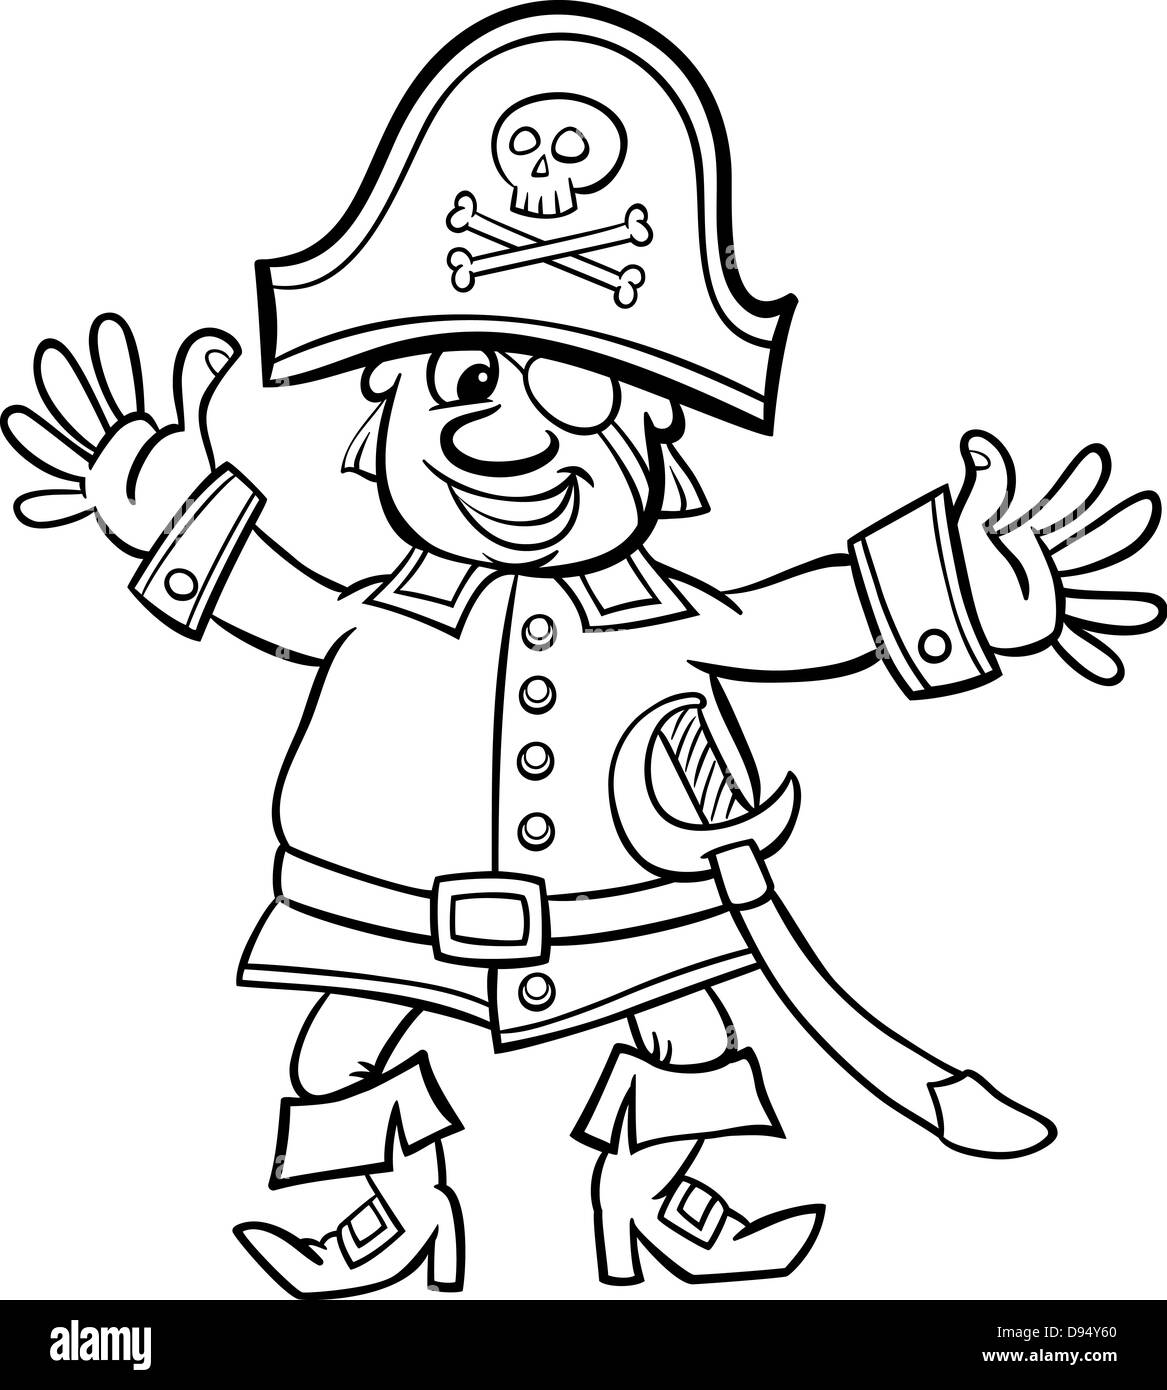 Black and White Cartoon Illustration of Funny Pirate Captain with Eye ...